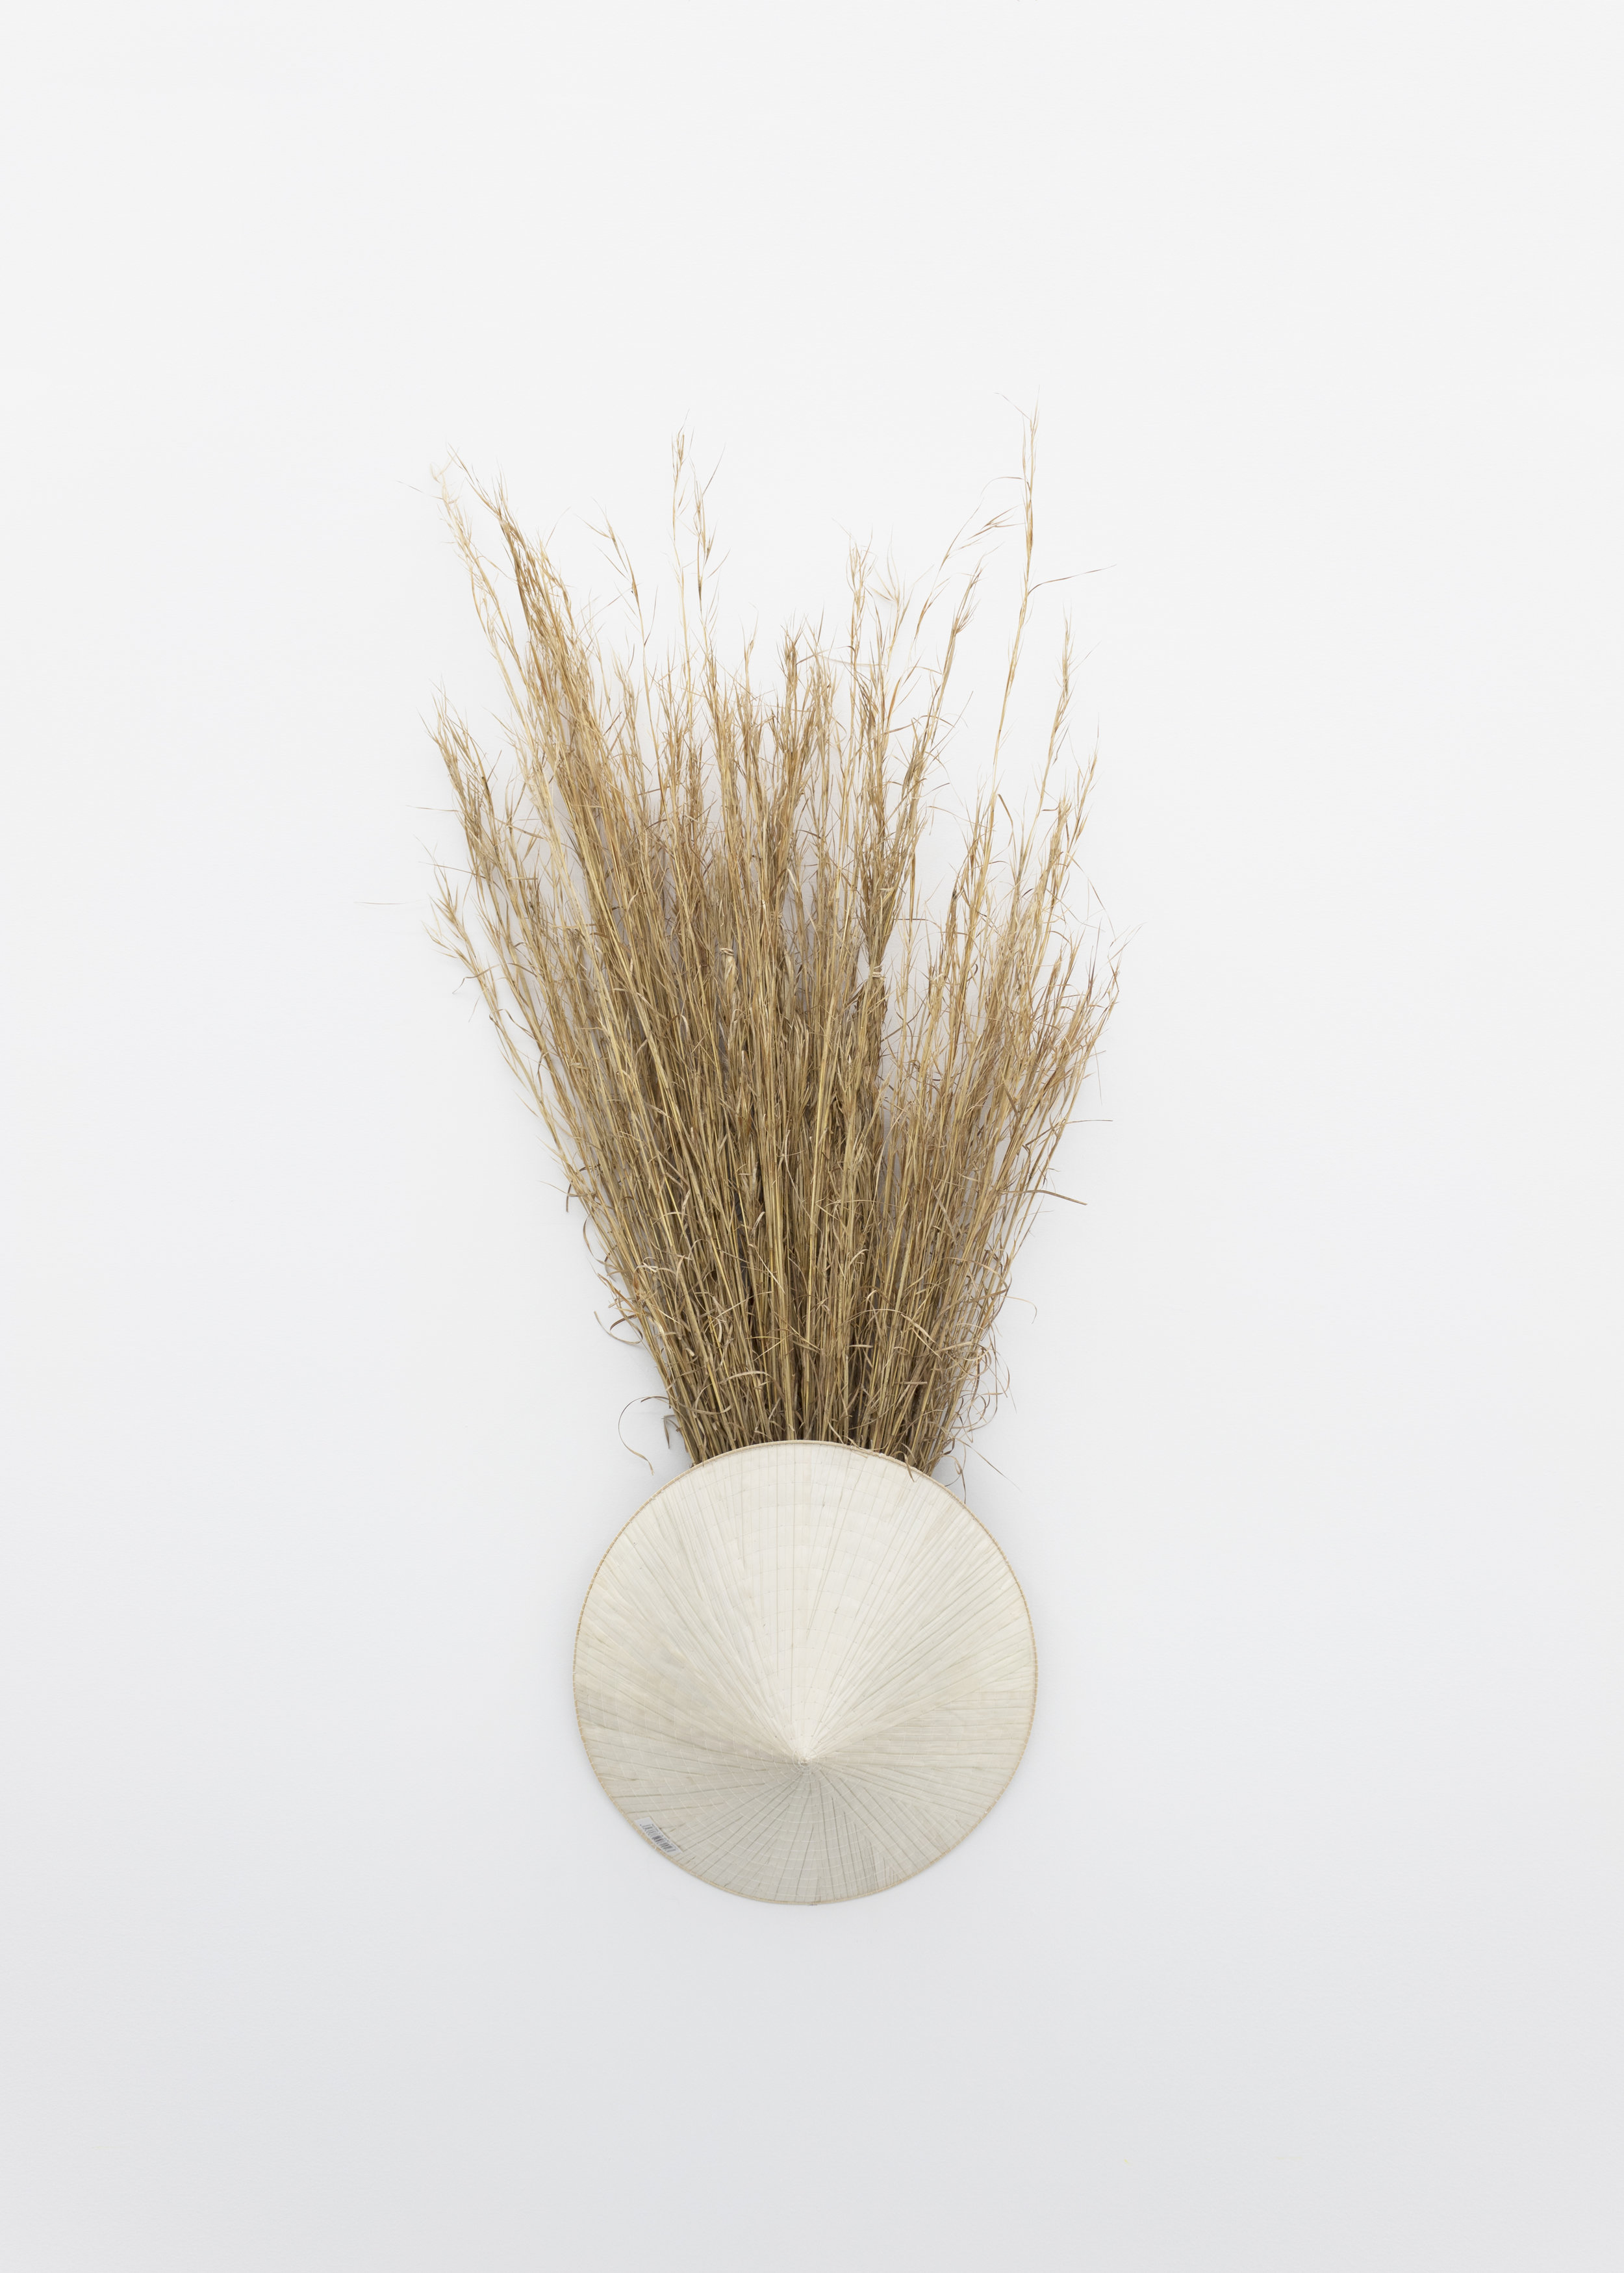  Millian Giang Lien Pham,  Preforge: 9 Stages (Two) , 2019. Grass, conical hat 